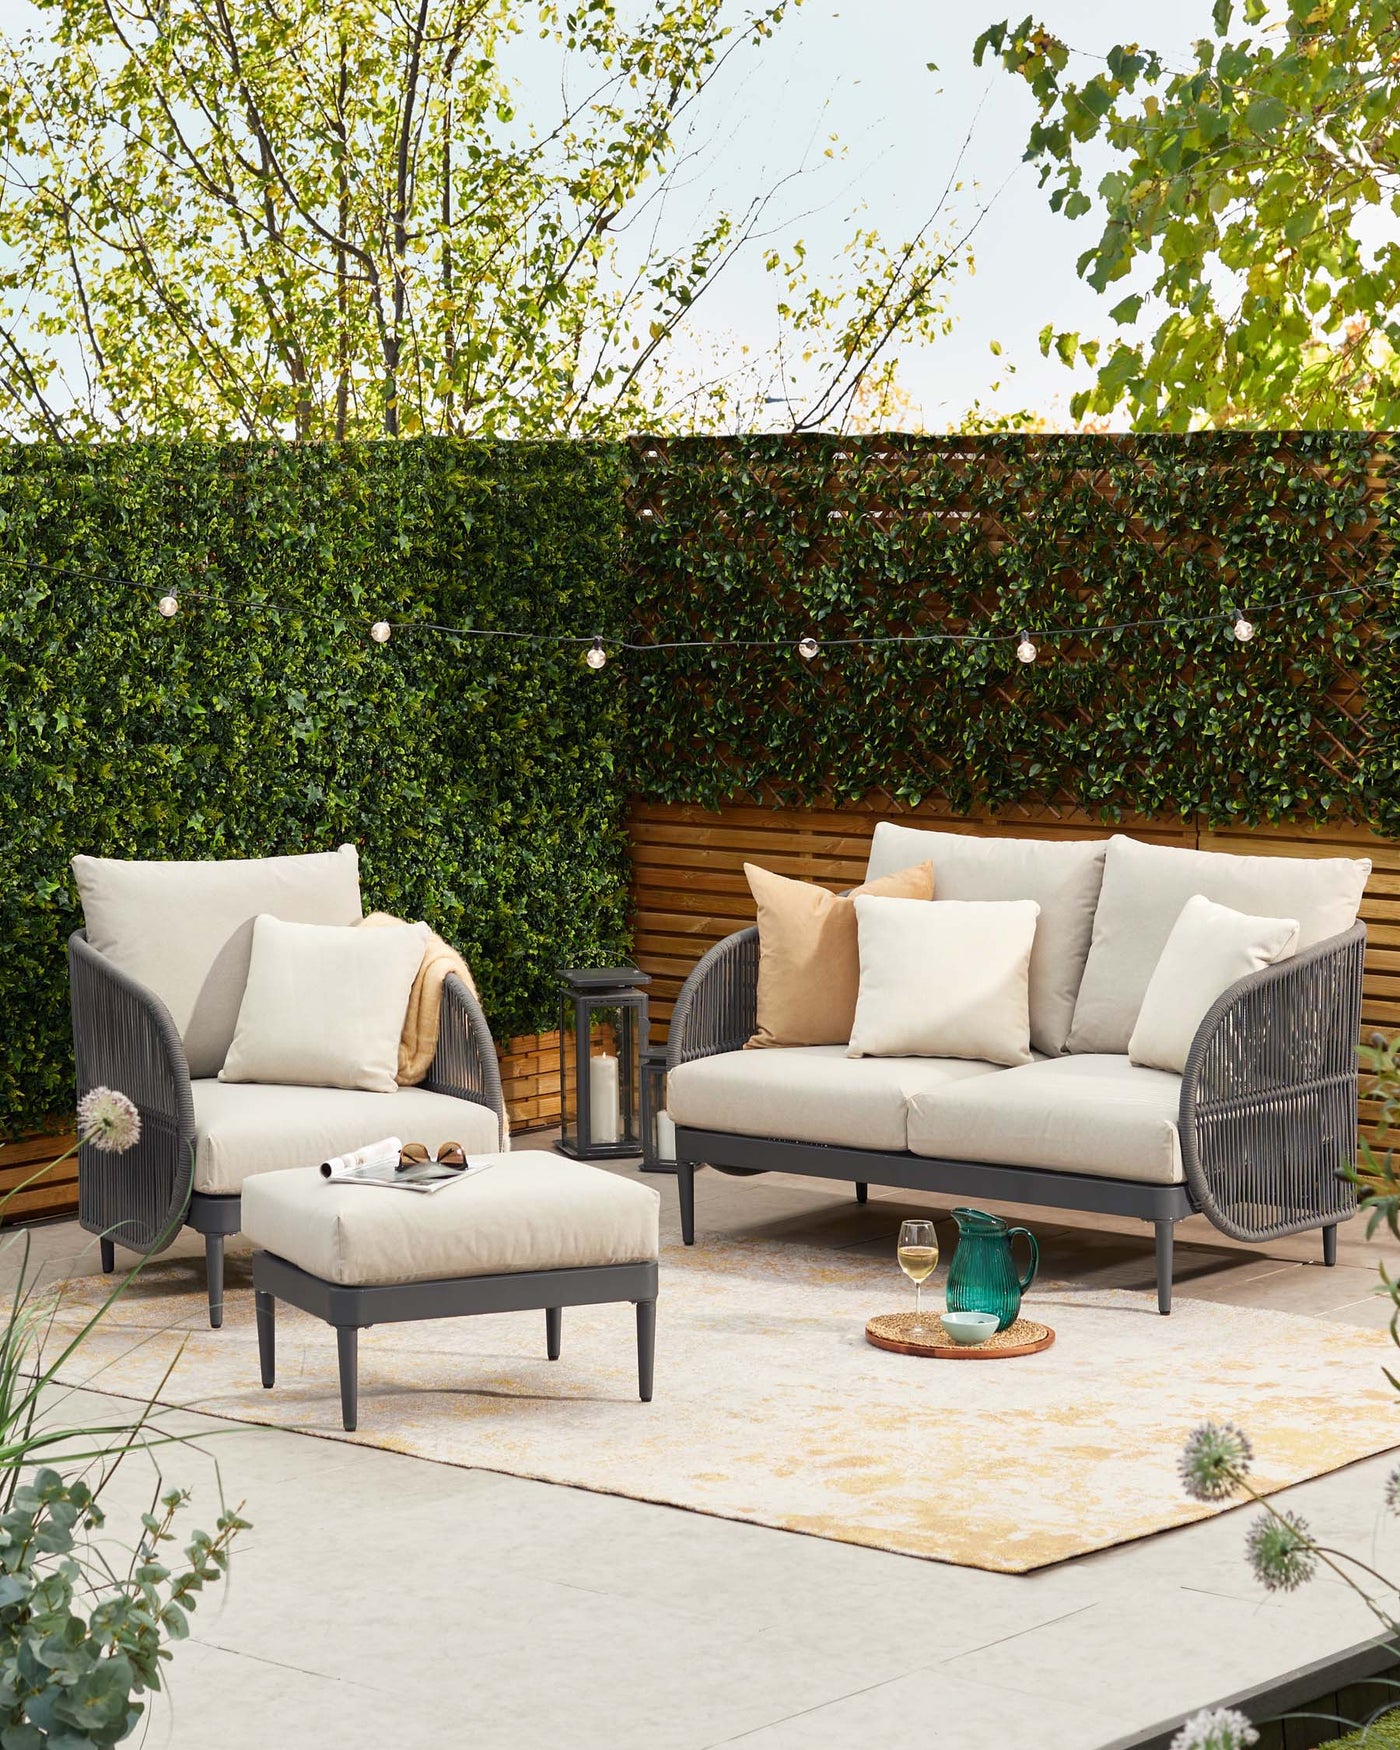 Elegant outdoor furniture set featuring a three-seater sofa with plush beige cushions, two high-back armchairs with matching cushions, and a rectangular ottoman, all with dark grey frames and woven side detailing. A small wooden side table and patterned area rug complement the arrangement.